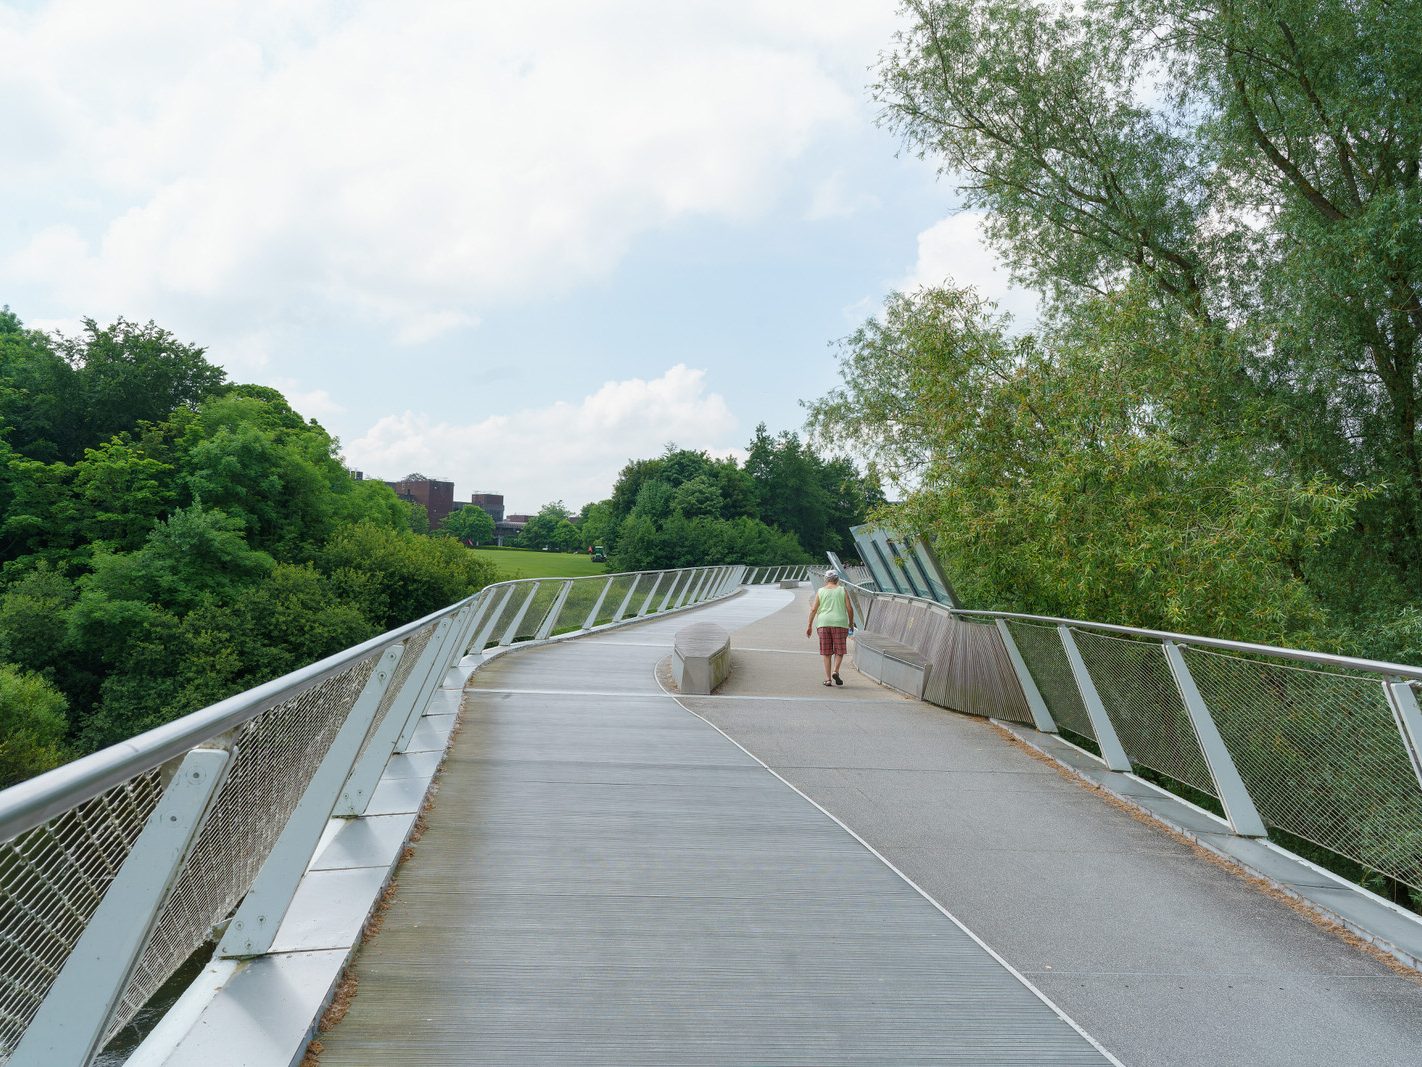 EXPLORING THE LIVING BRIDGE ACROSS THE RIVER SHANNON [CYCLISTS ARE SUPPOSED TO DISMOUNT]-227686-1